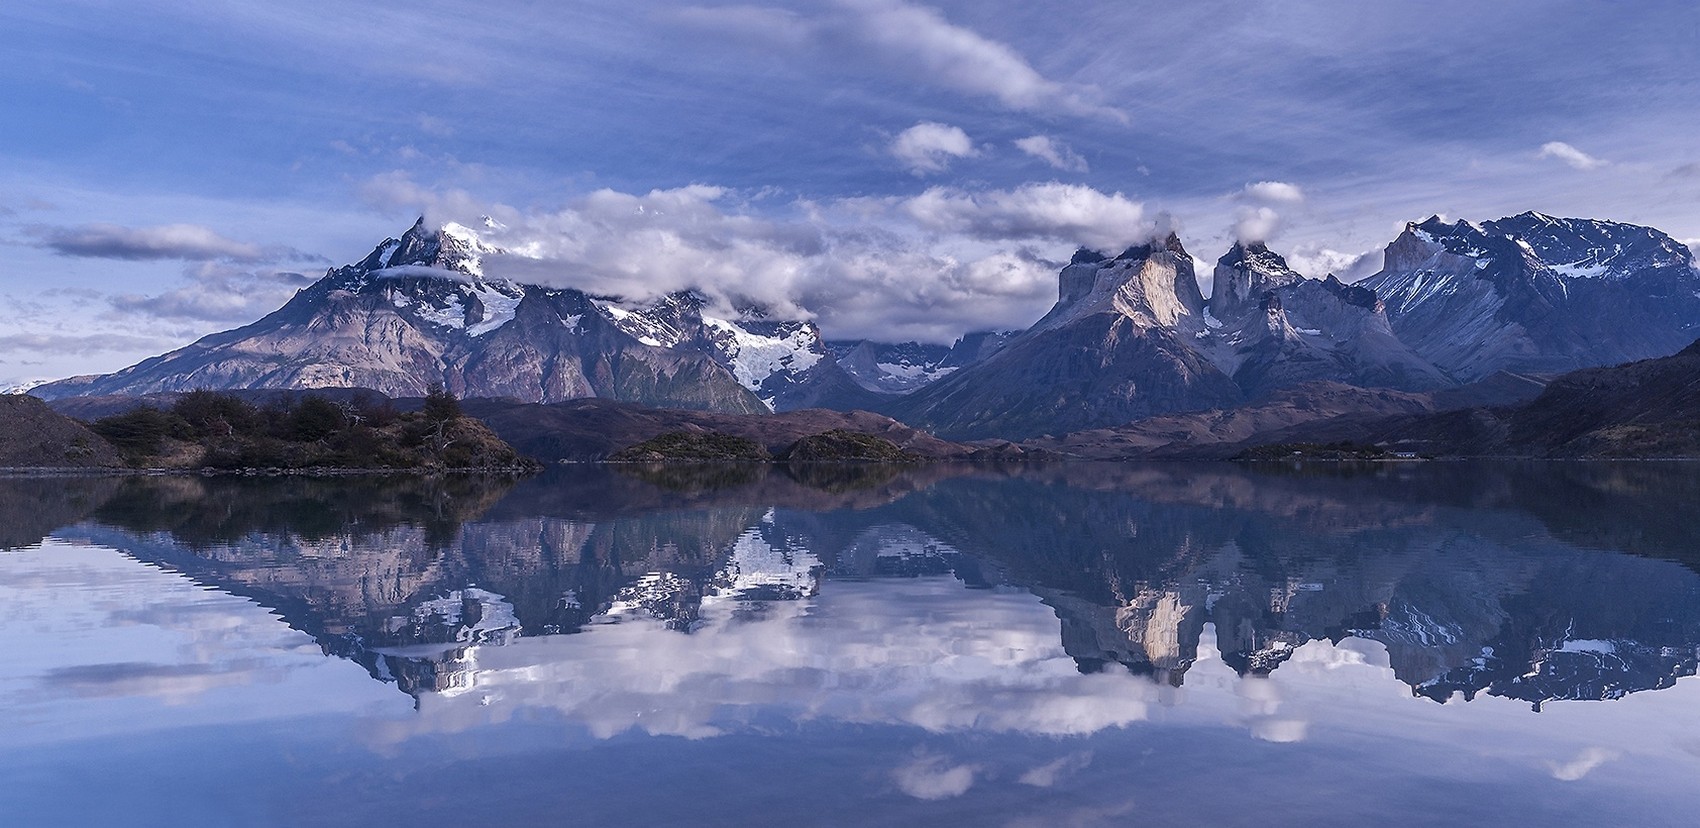 General 1700x828 nature landscape summer mountains morning reflection lake water clouds Torres del Paine Chile snowy peak Patagonia trees South America